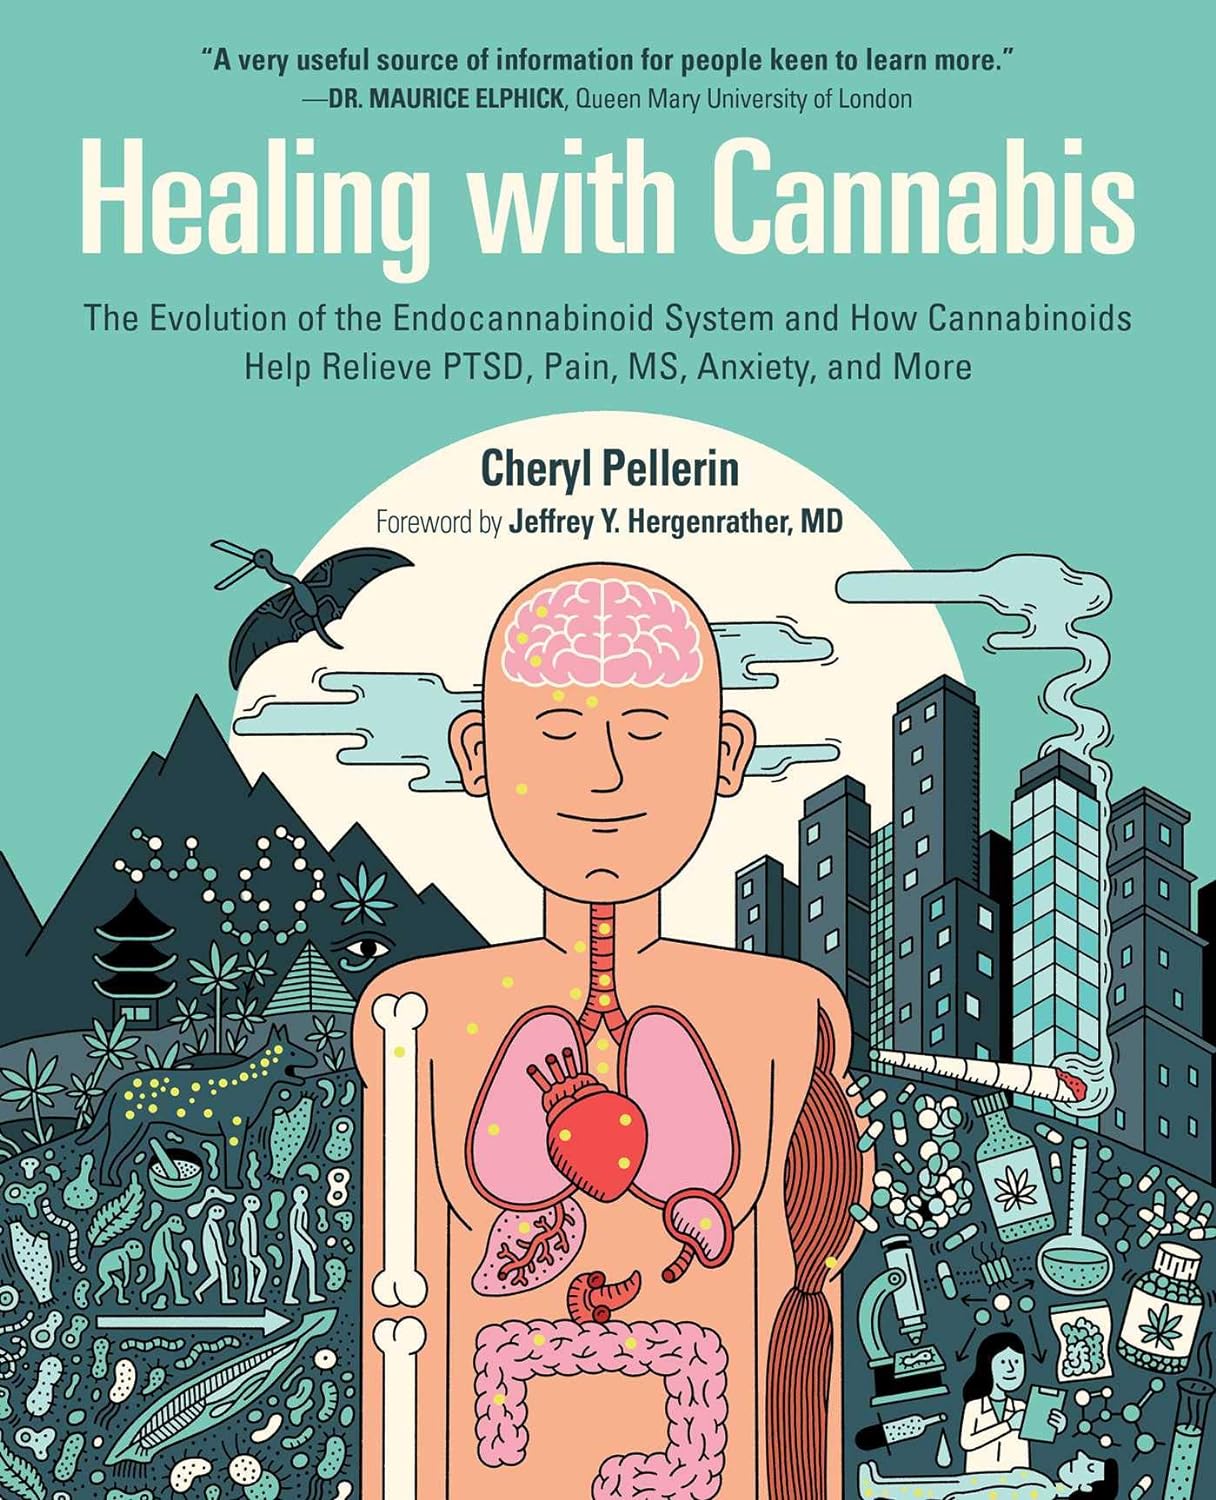 Healing with Cannabis: The Evolution of the Endocannabinoid System and How Cannabinoids Help Relieve PTSD, Pain, MS, Anxiety, and More     Hardcover – August 4, 2020